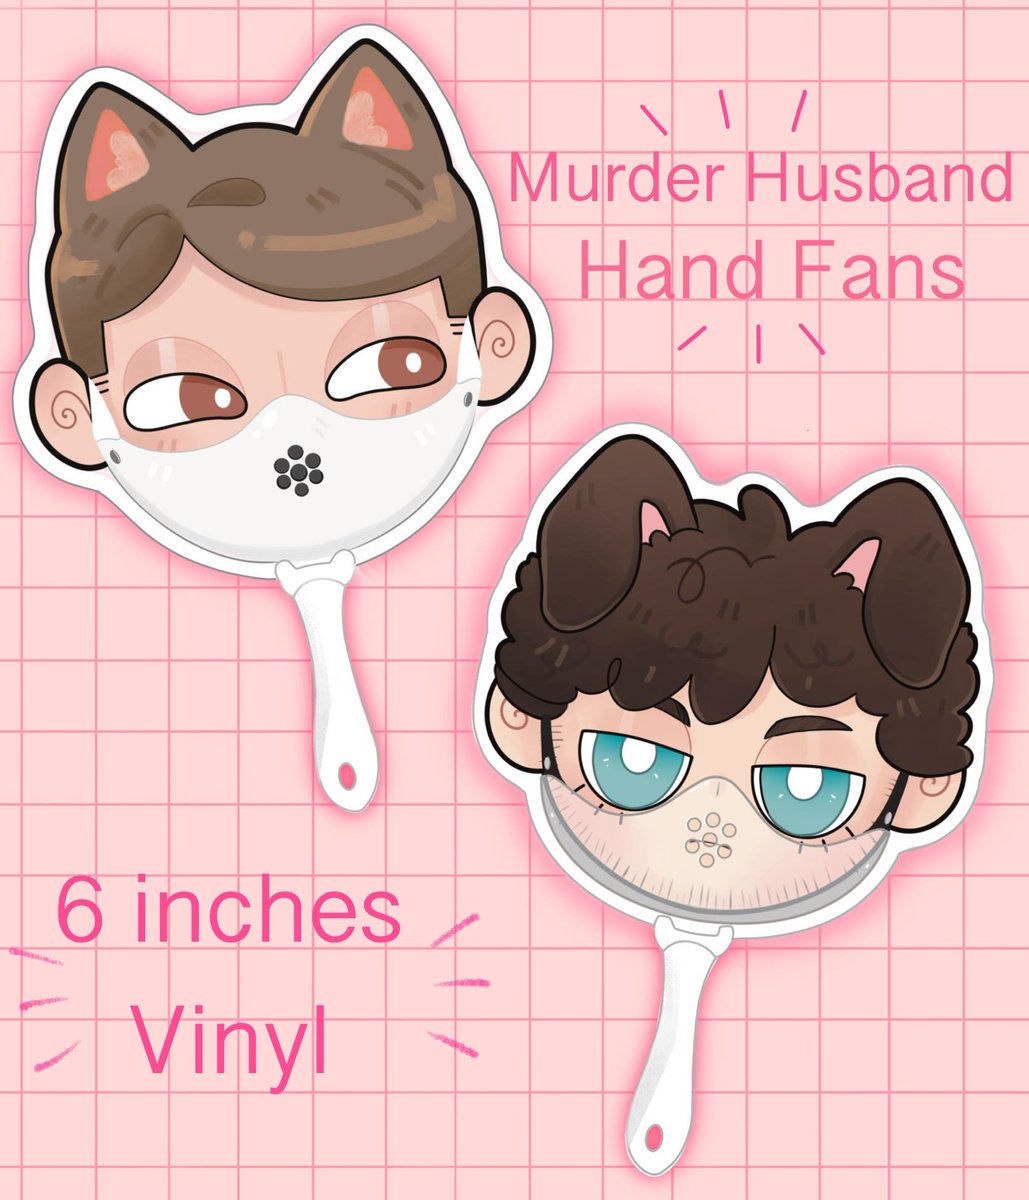 I had a bit of time to design some hanninal hand fans! 
Pre Order soon? ✨️
.
#Hannibal #heu #WillGraham